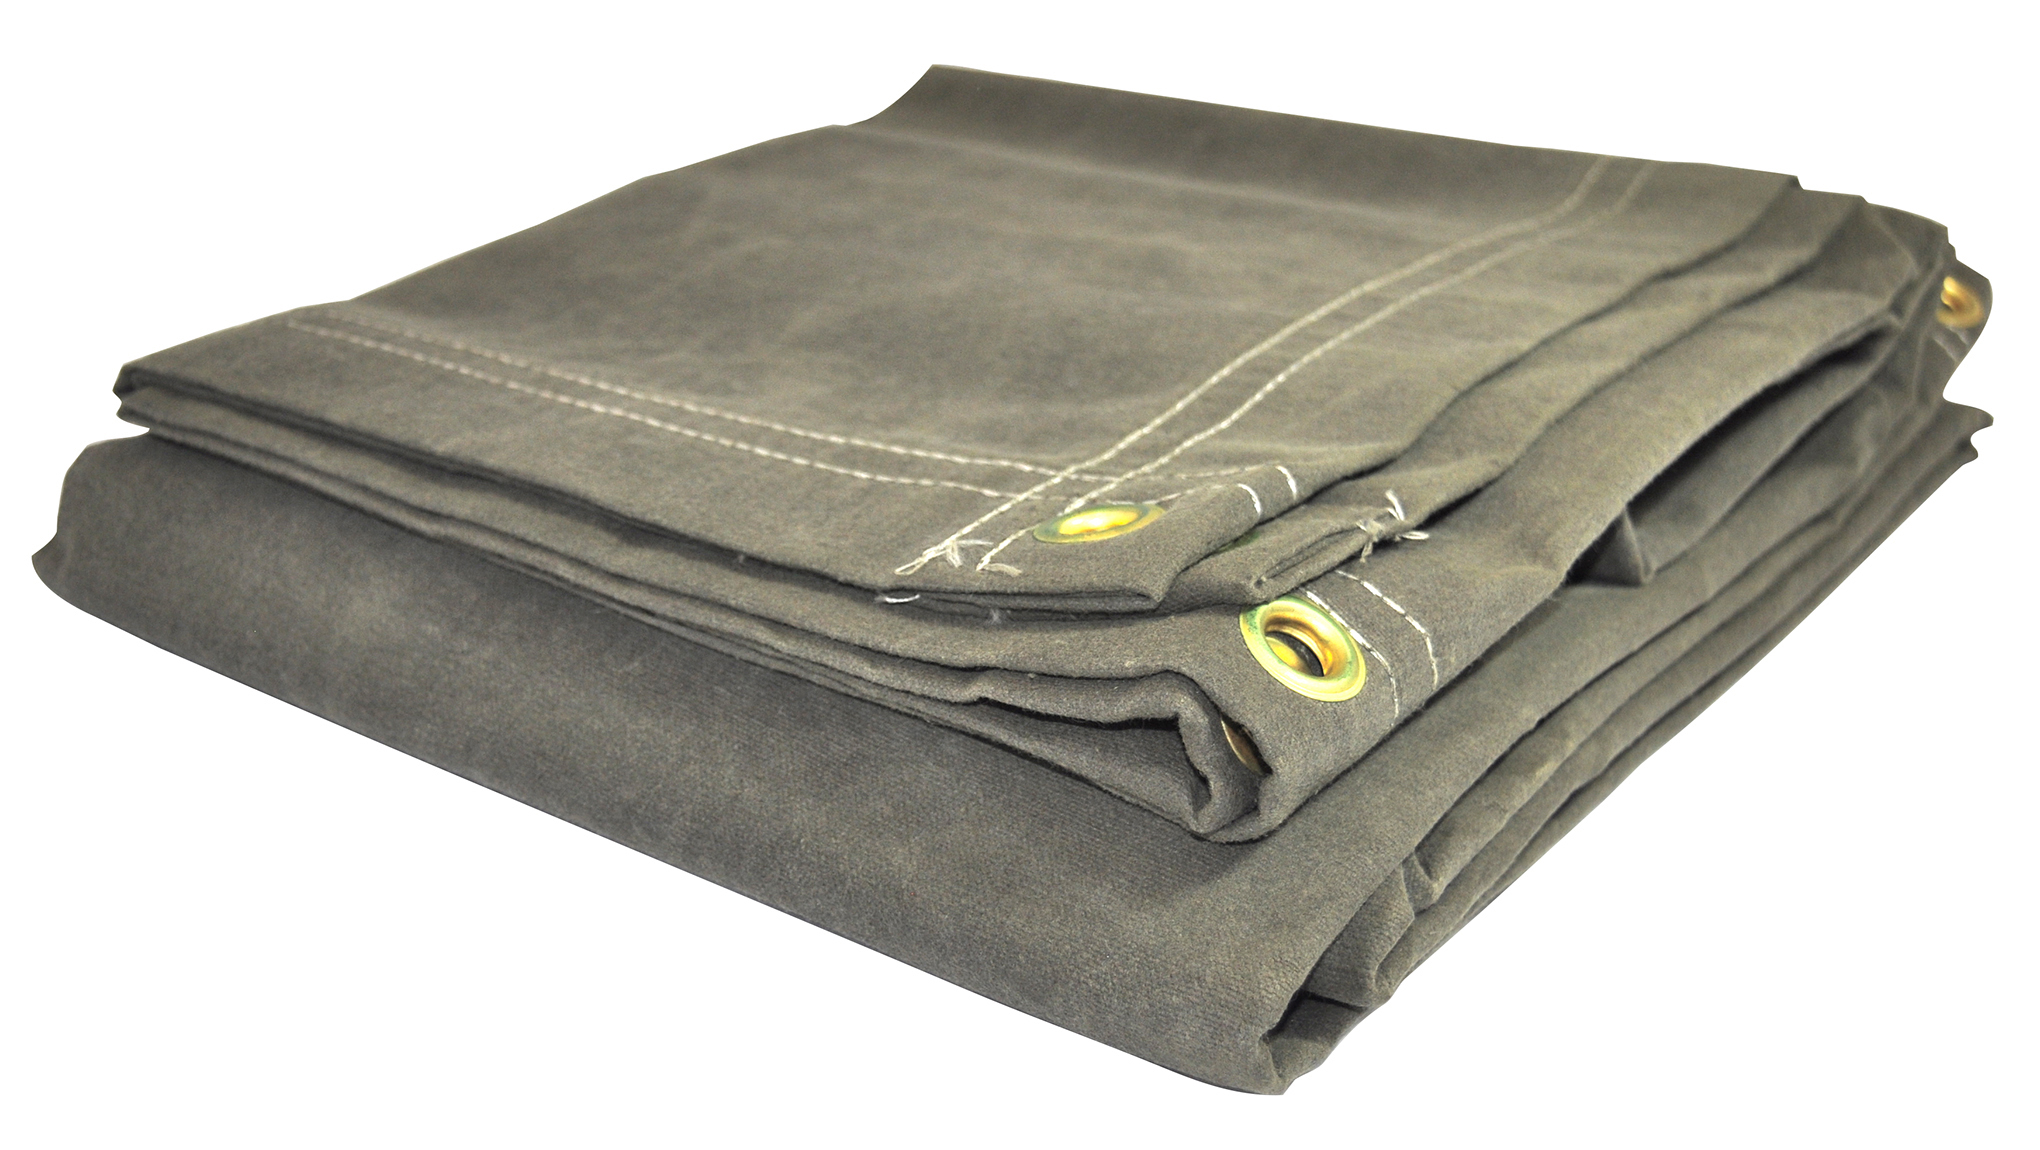 Foremost Dry Top 8 ft. x 10 ft. Heavy Duty Canvas Tarp Olive - image 1 of 4